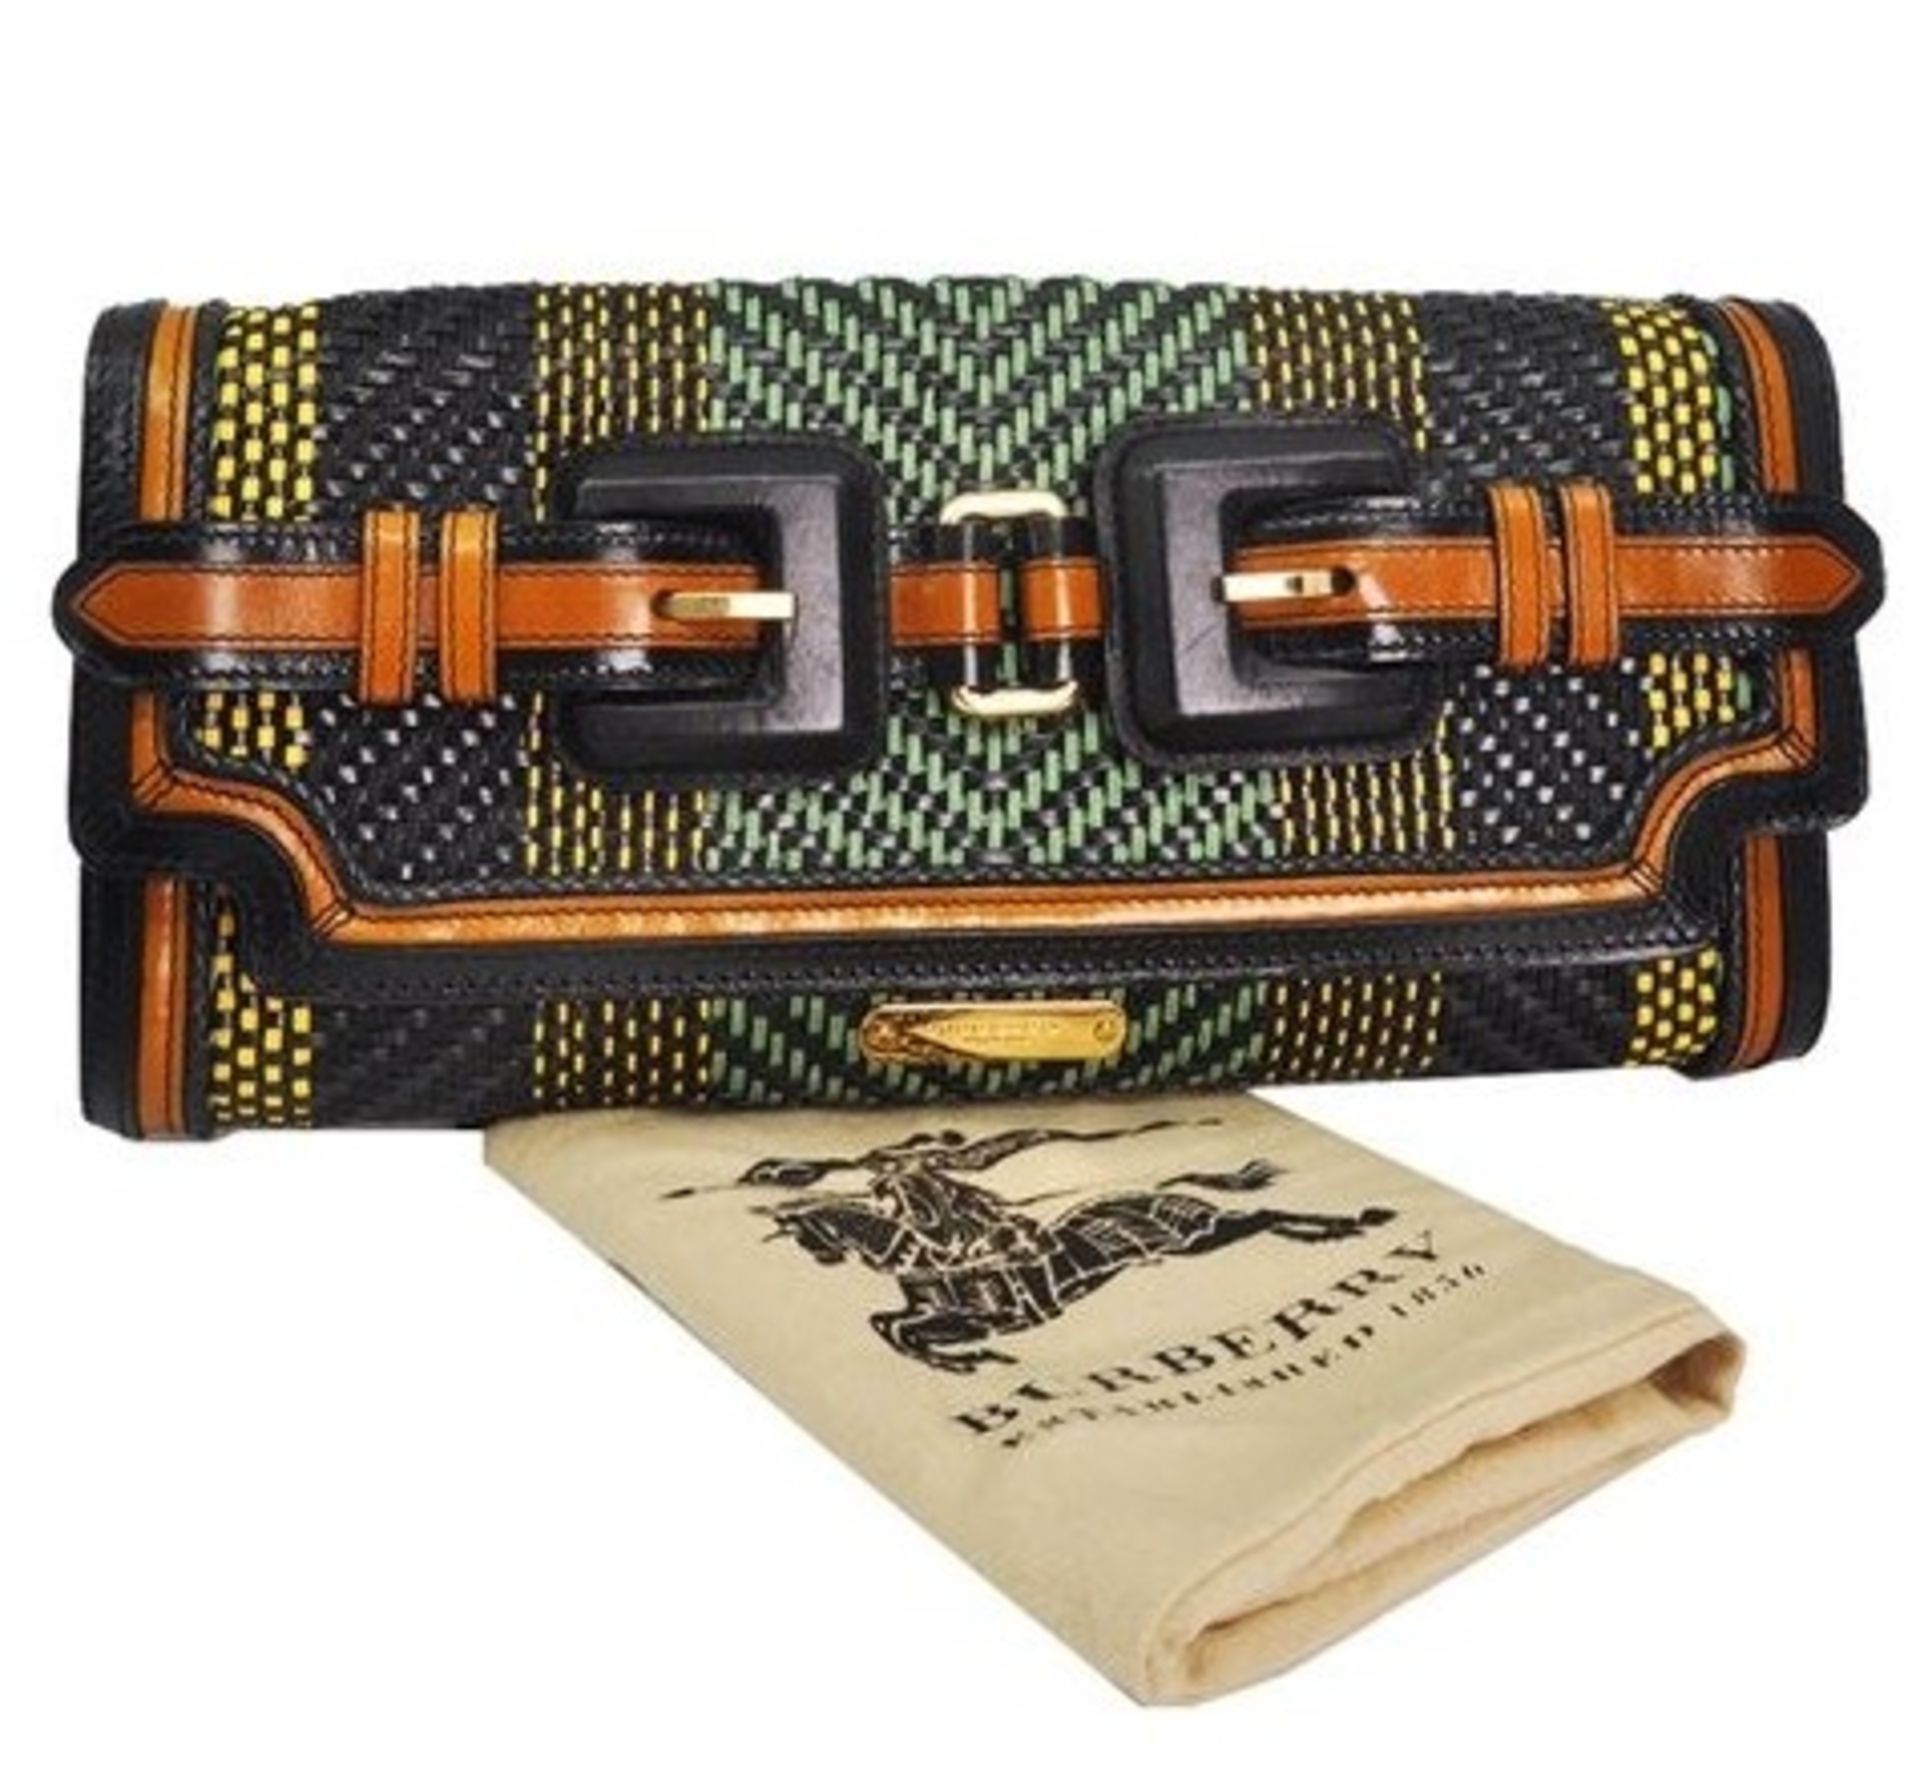 Burberry Wicker Knitting Leather Clutch - Image 2 of 8